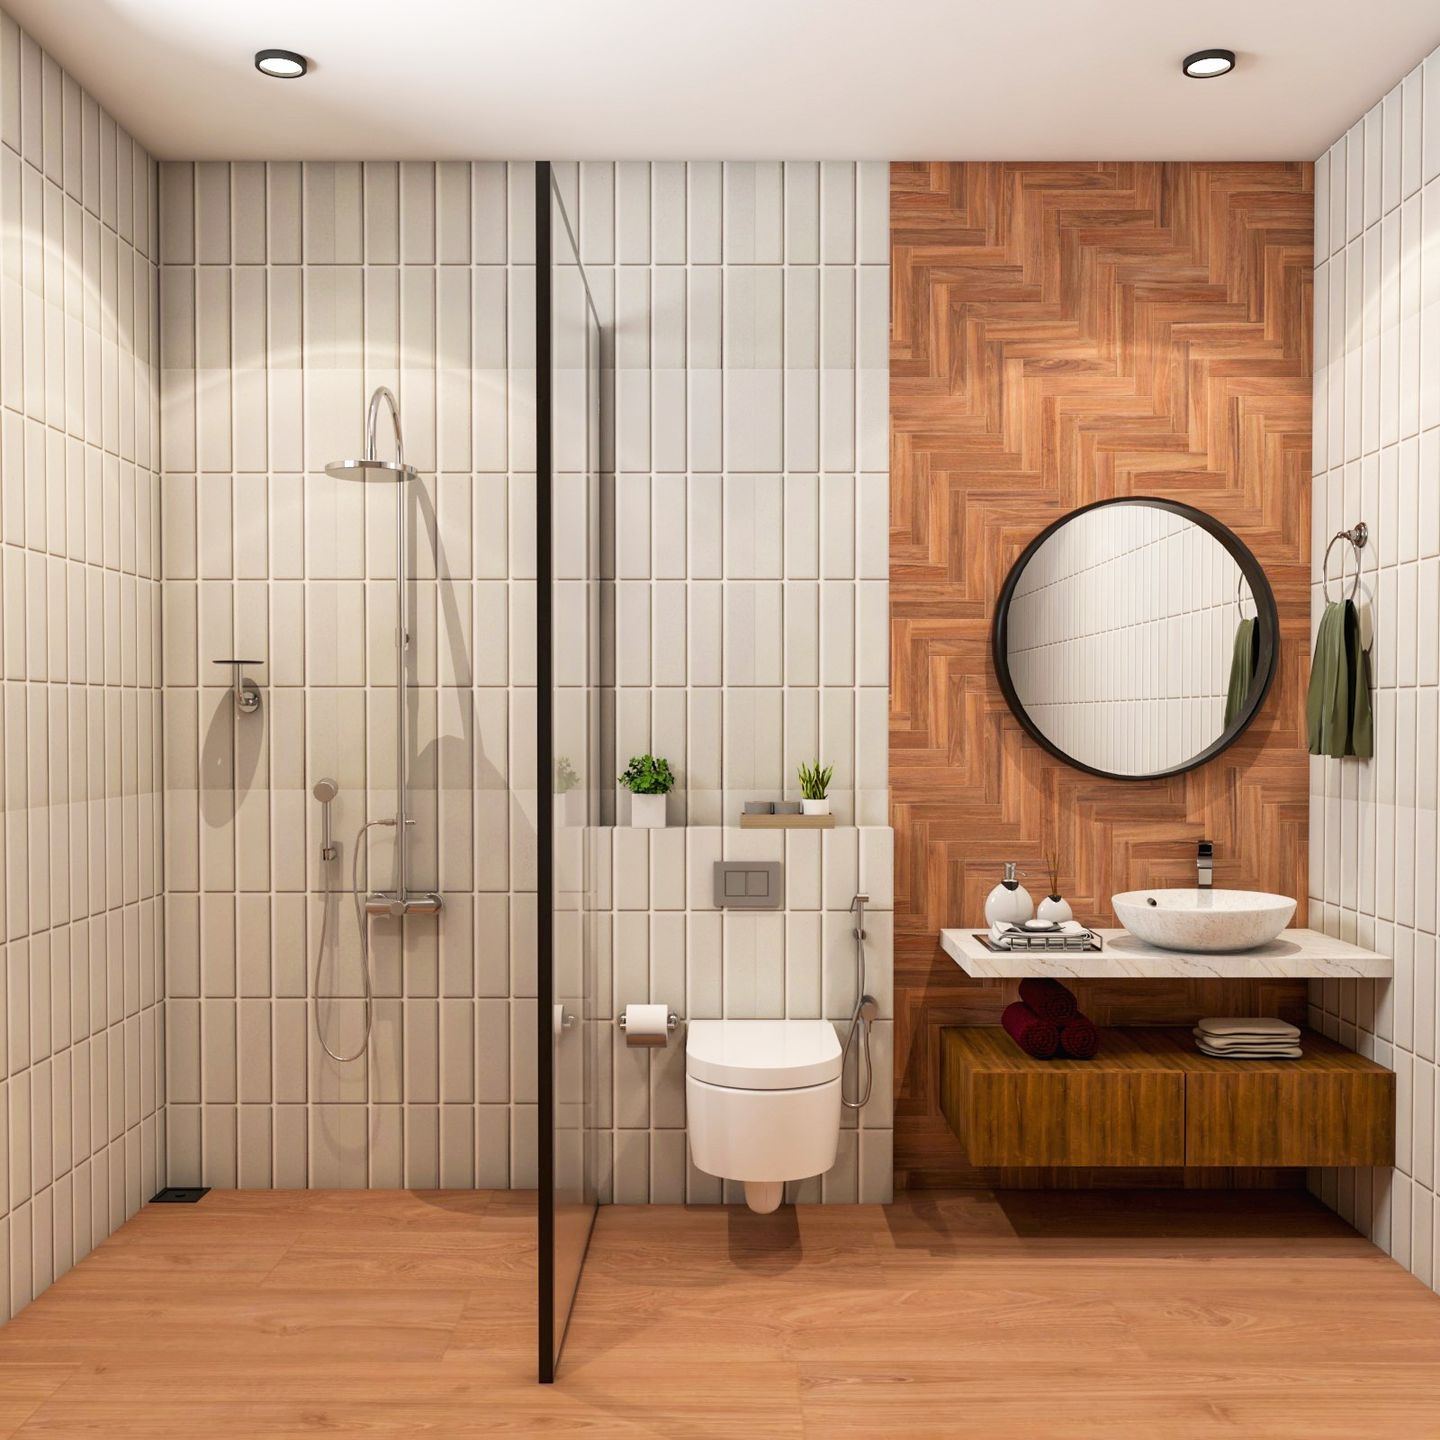 White And Brown Bathroom Design With Herringbone And Subway Tiles - Livspace